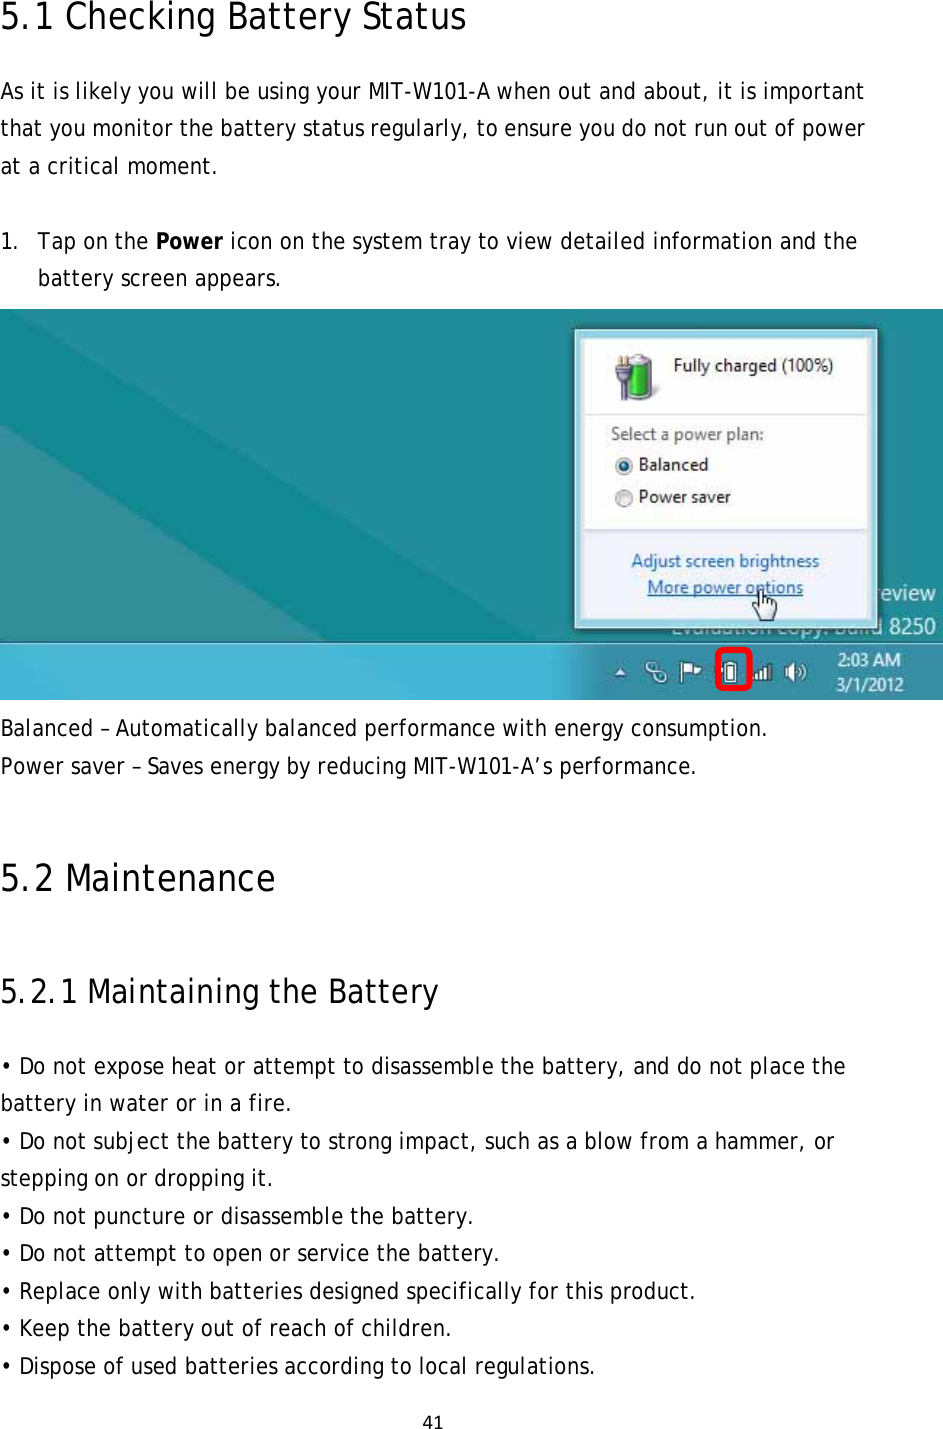 415.1 Checking Battery Status As it is likely you will be using your MIT-W101-A when out and about, it is important that you monitor the battery status regularly, to ensure you do not run out of power at a critical moment.  1. Tap on the Power icon on the system tray to view detailed information and the battery screen appears.   Balanced – Automatically balanced performance with energy consumption. Power saver – Saves energy by reducing MIT-W101-A’s performance.  5.2 Maintenance 5.2.1 Maintaining the Battery • Do not expose heat or attempt to disassemble the battery, and do not place the battery in water or in a fire. • Do not subject the battery to strong impact, such as a blow from a hammer, or stepping on or dropping it. • Do not puncture or disassemble the battery. • Do not attempt to open or service the battery. • Replace only with batteries designed specifically for this product. • Keep the battery out of reach of children. • Dispose of used batteries according to local regulations. 